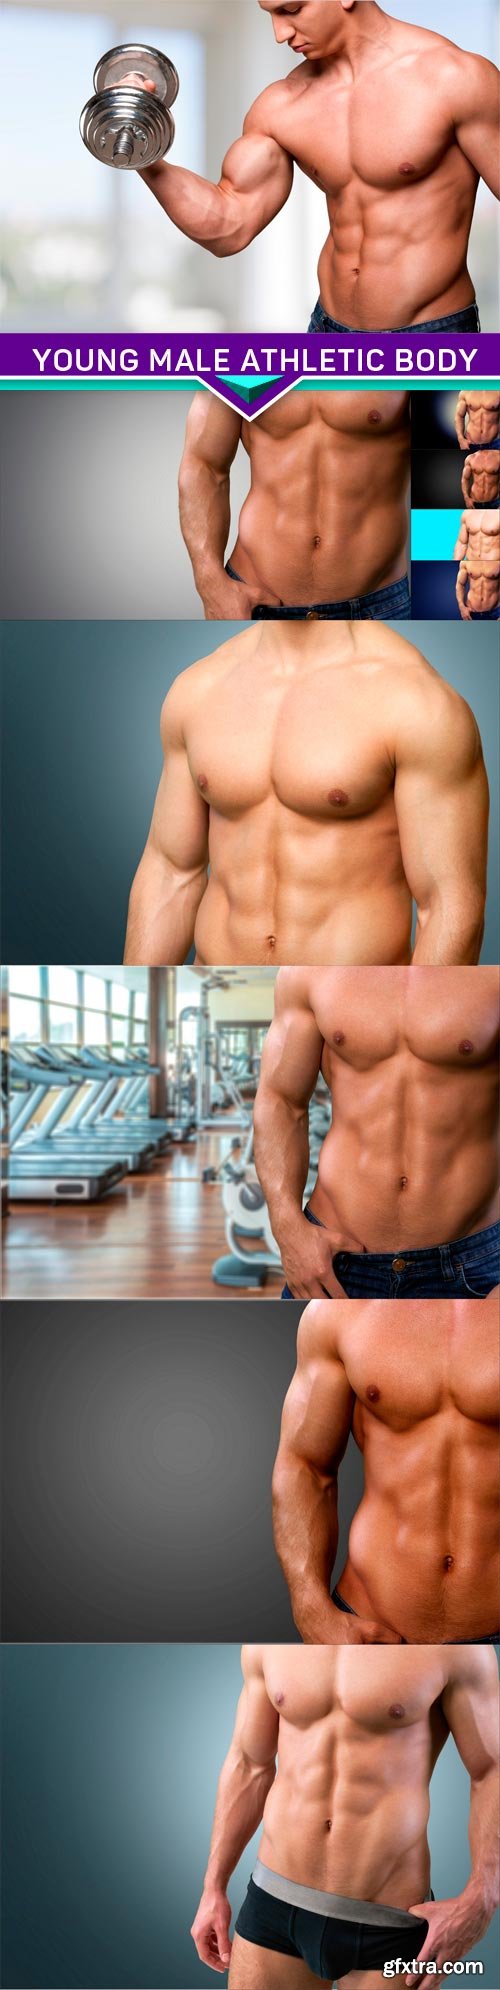 Young male athletic body 10x JPEG